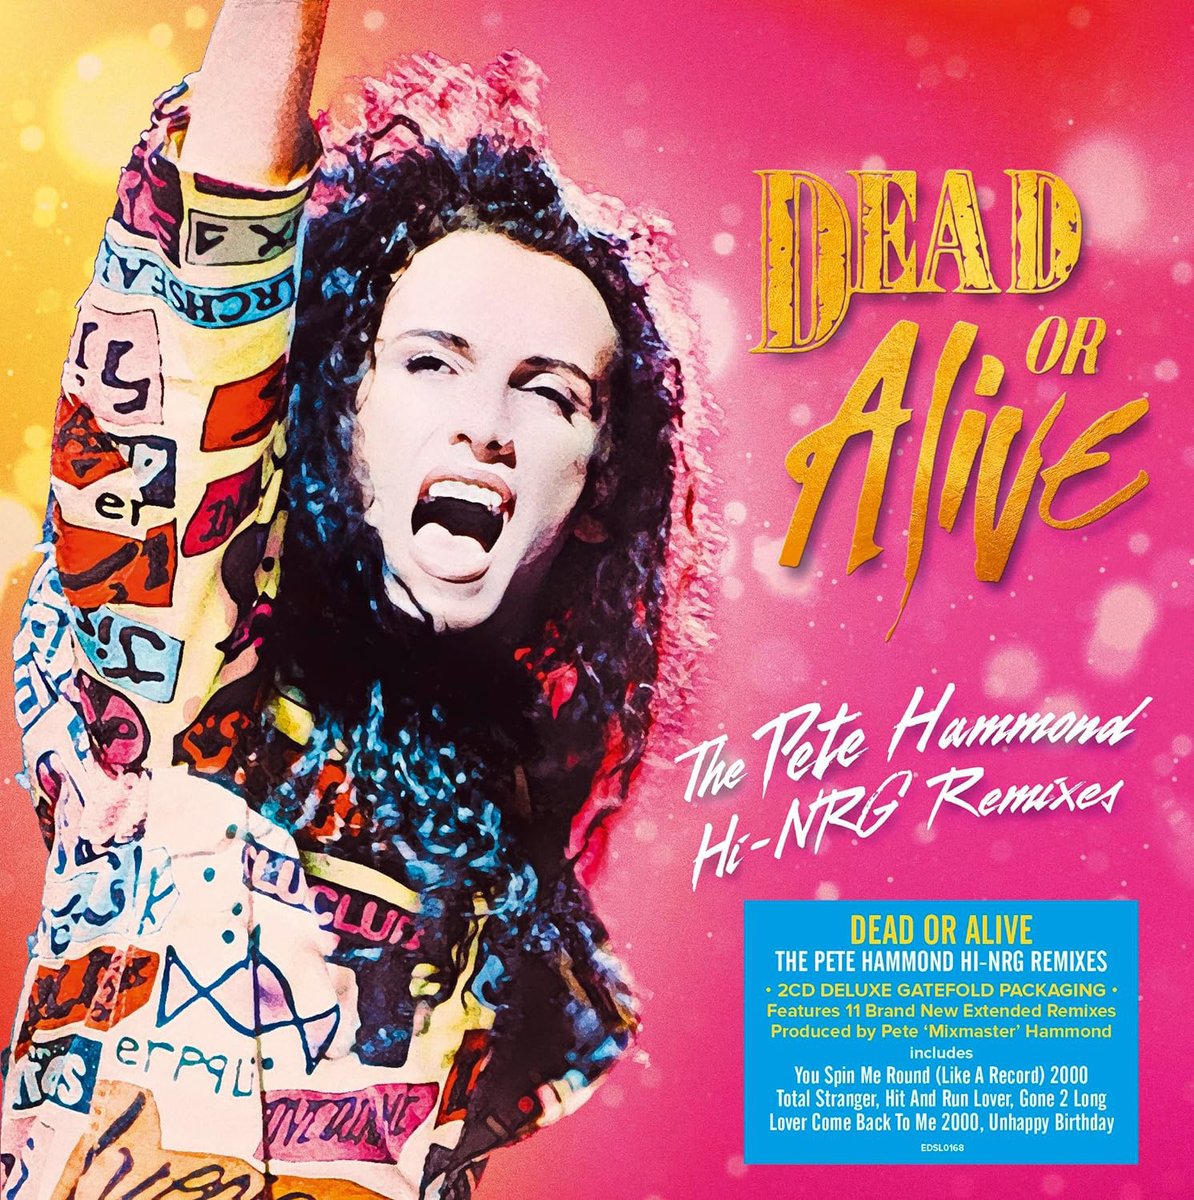 I'm having a lot of fun listening to the new Pete Hammond Dead Or Alive remix album. Has put a big smile on my face.